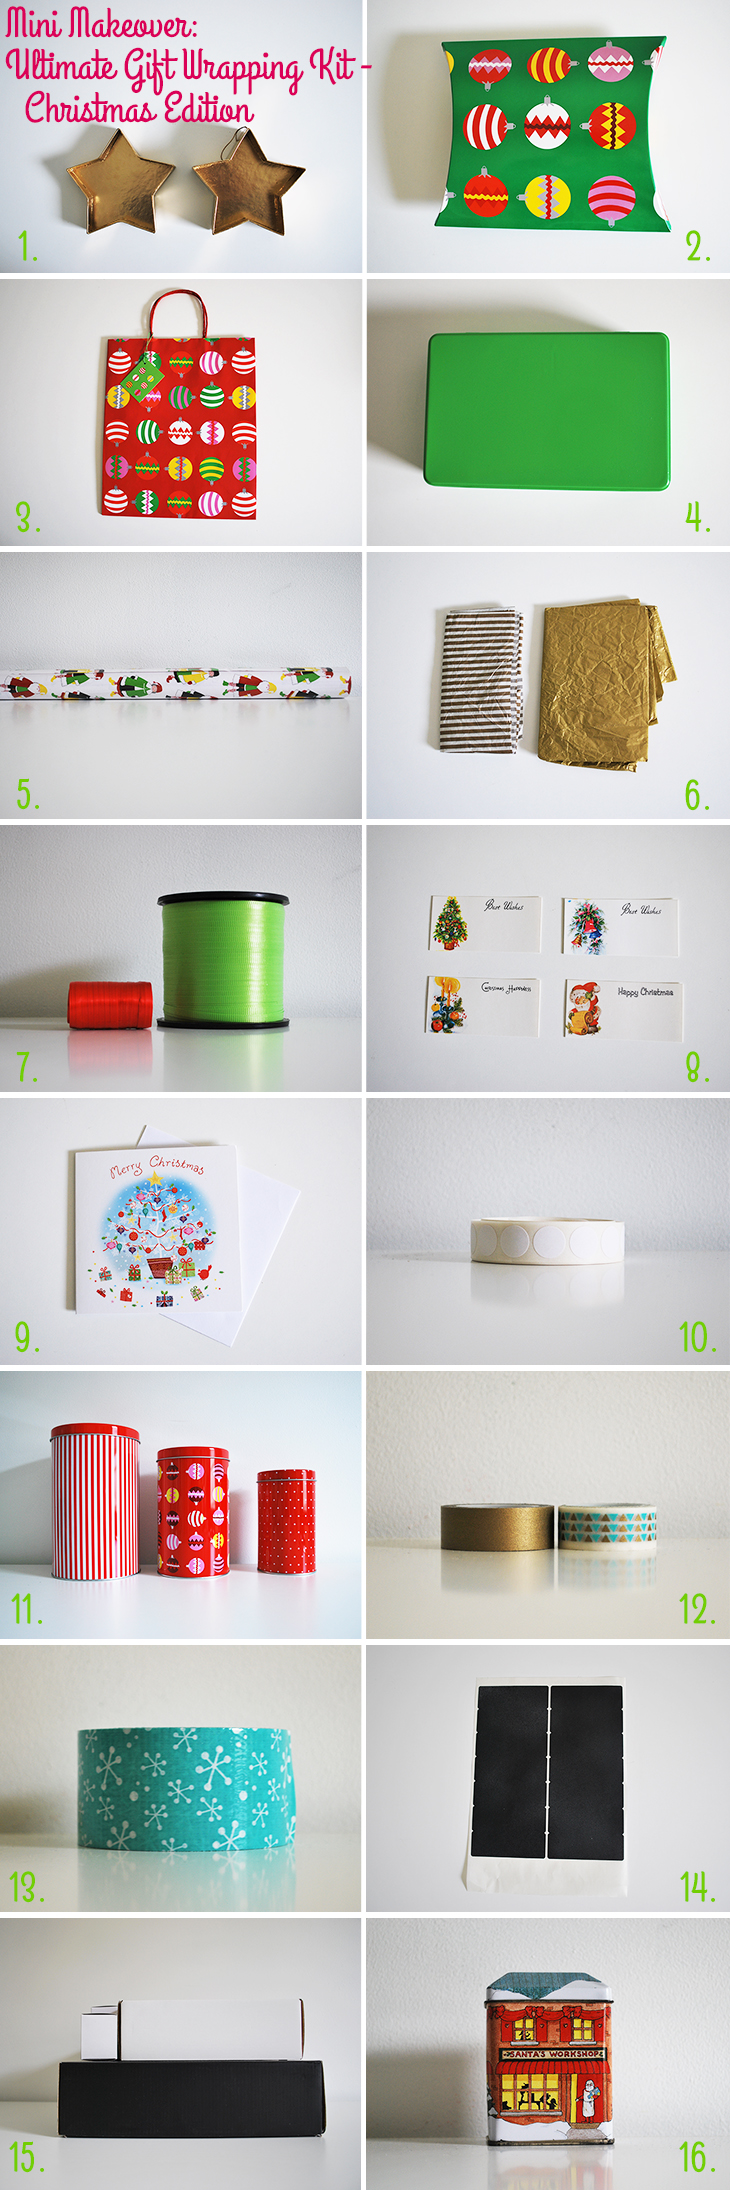 Mini Makeover: Ultimate Gift Wrapping Kit - Christmas Edition on Style for a Happy Home